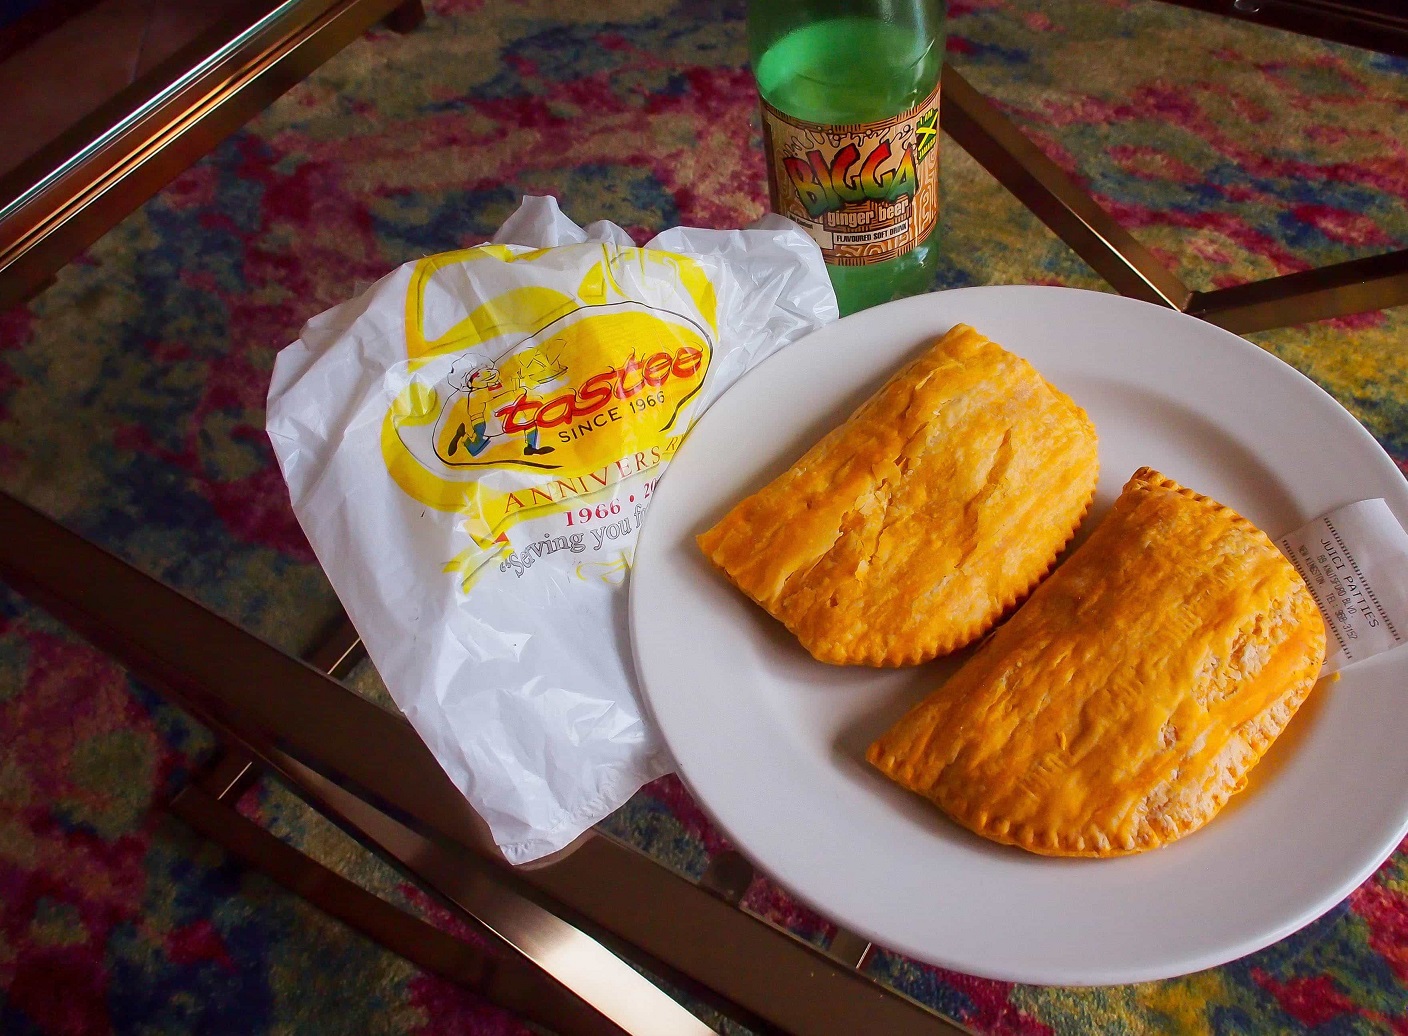 <p> Jamaican patties are a favorite snack or meal on the go. These flaky pastry pockets are filled with various ingredients, including spiced beef, chicken, or vegetables. The dough is usually tinted yellow, giving the patties their distinctive color. Spicy, savory, and satisfying, Jamaican patties are a must-try, whether you grab one from a street vendor or a local bakery. If possible, seek out freshly basked patties from Tastee.. </p> :: Uncommon Caribbean